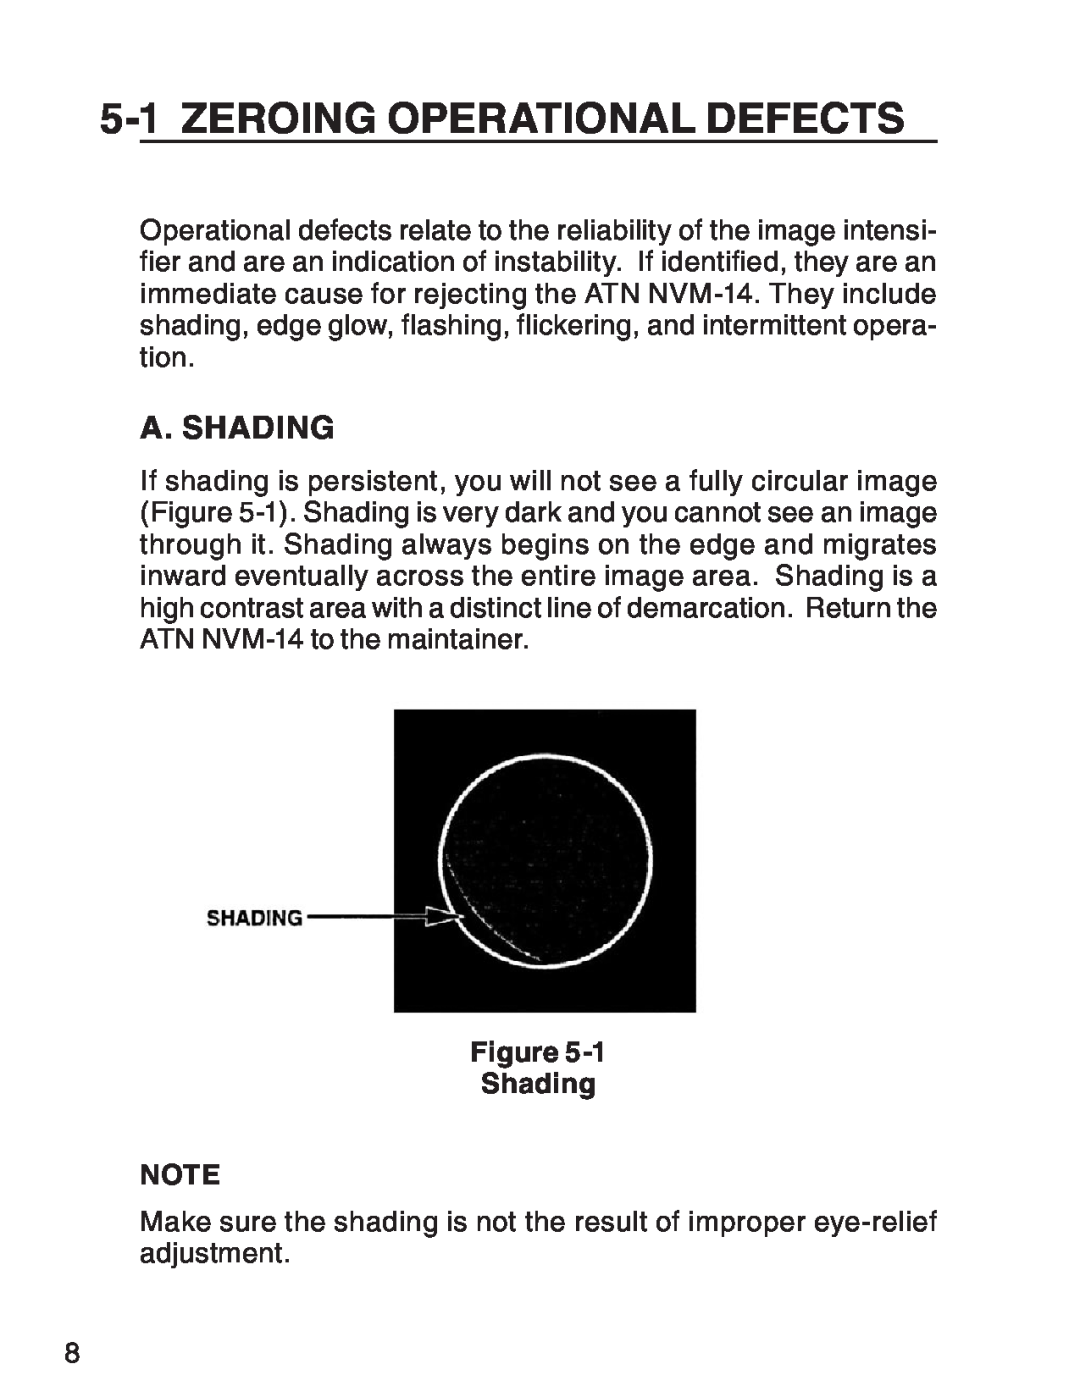 ATN 3 manual Zeroing Operational Defects, a. Shading 